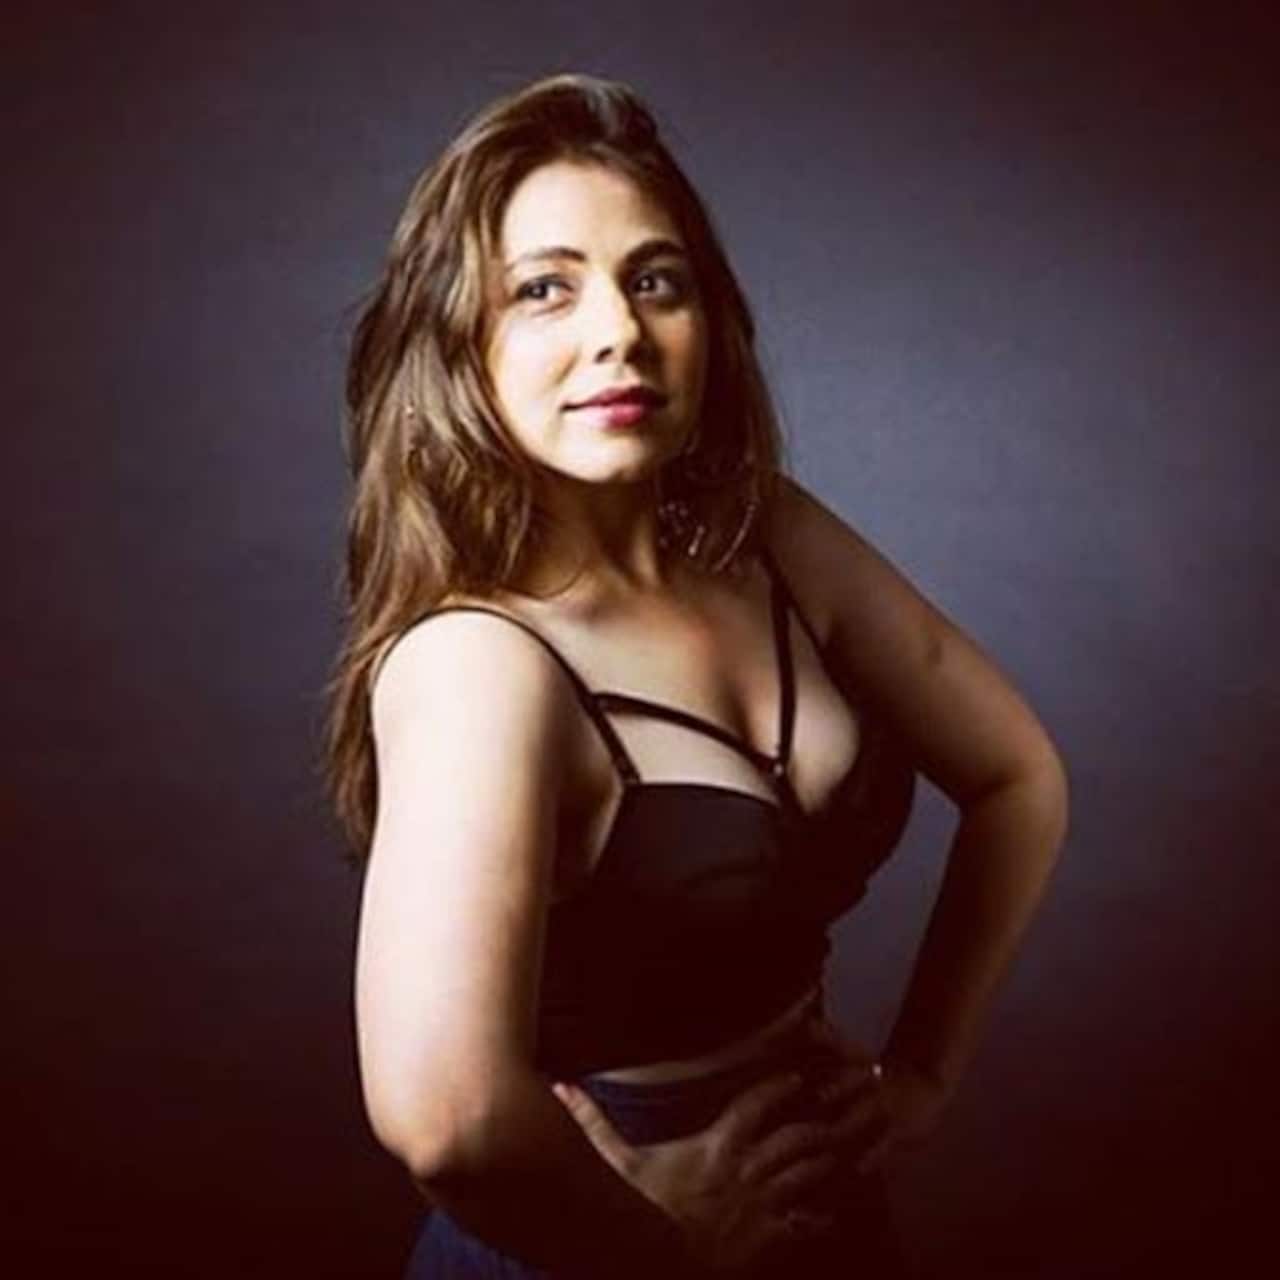 Fashion label apologises to Maanvi Gagroo after fat-shaming her in an advertisement